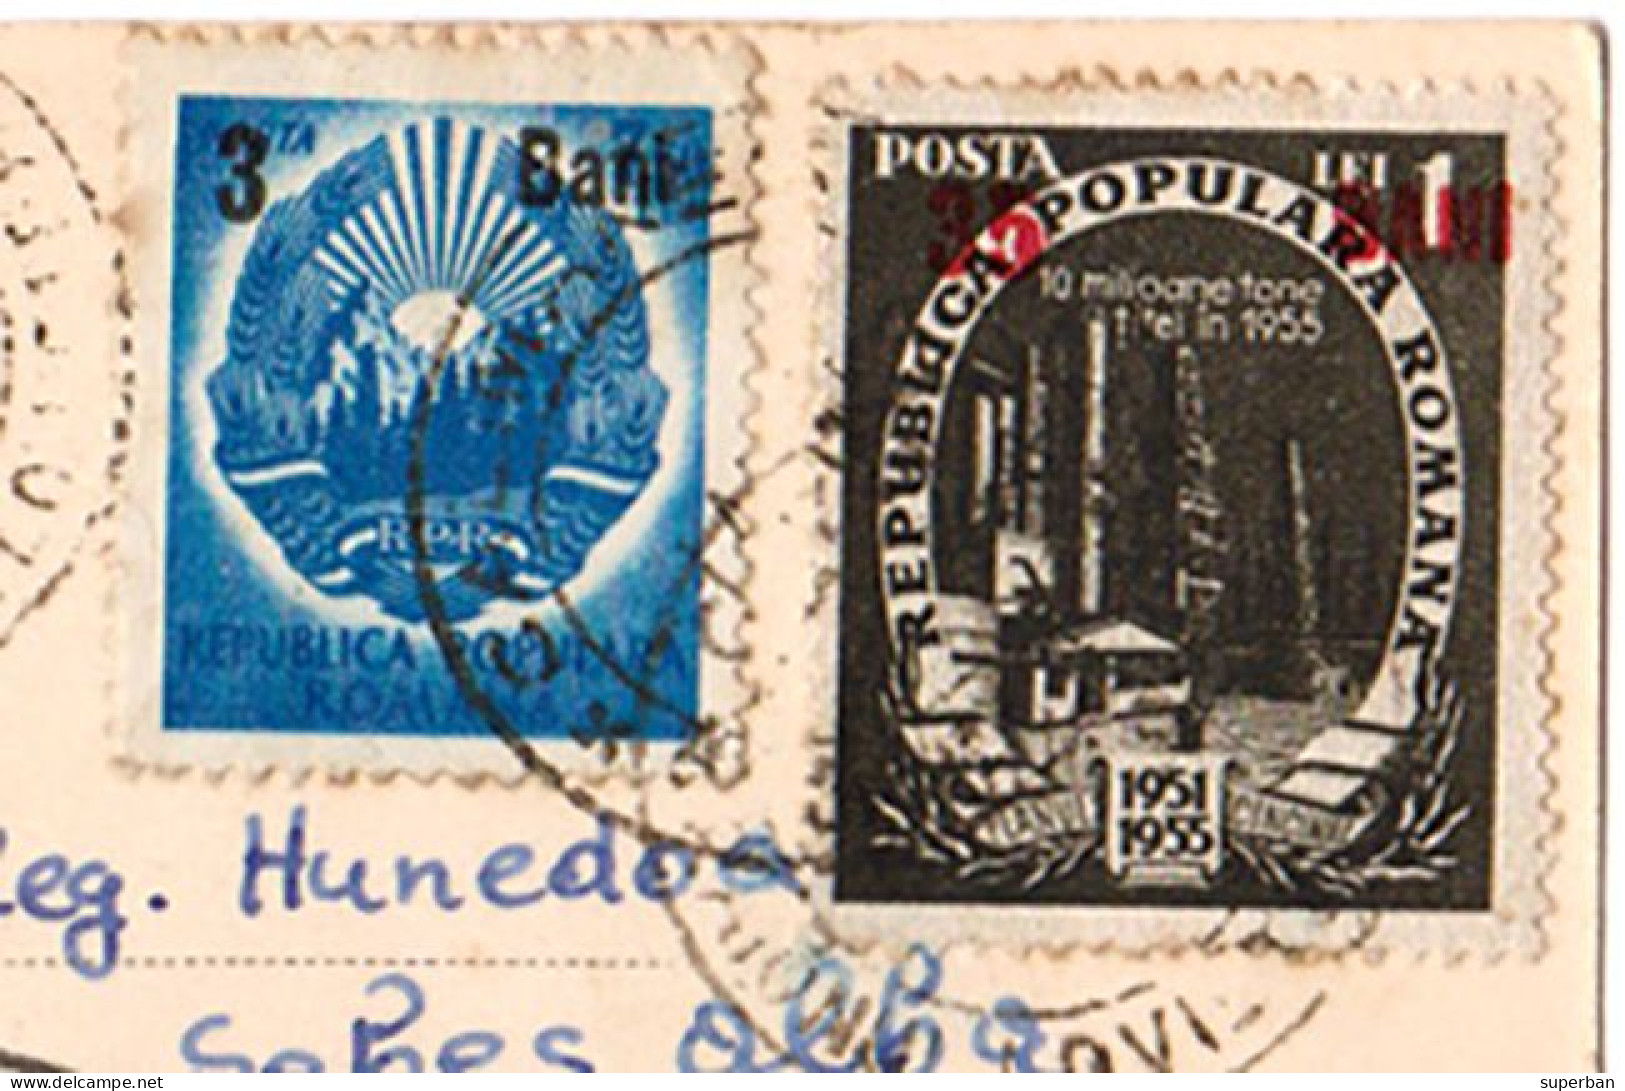 ROMANIA : 1952 - STABILIZAREA MONETARA / MONETARY STABILIZATION - POSTCARD MAILED With OVERPRINTED STAMPS - RRR (an504) - Covers & Documents